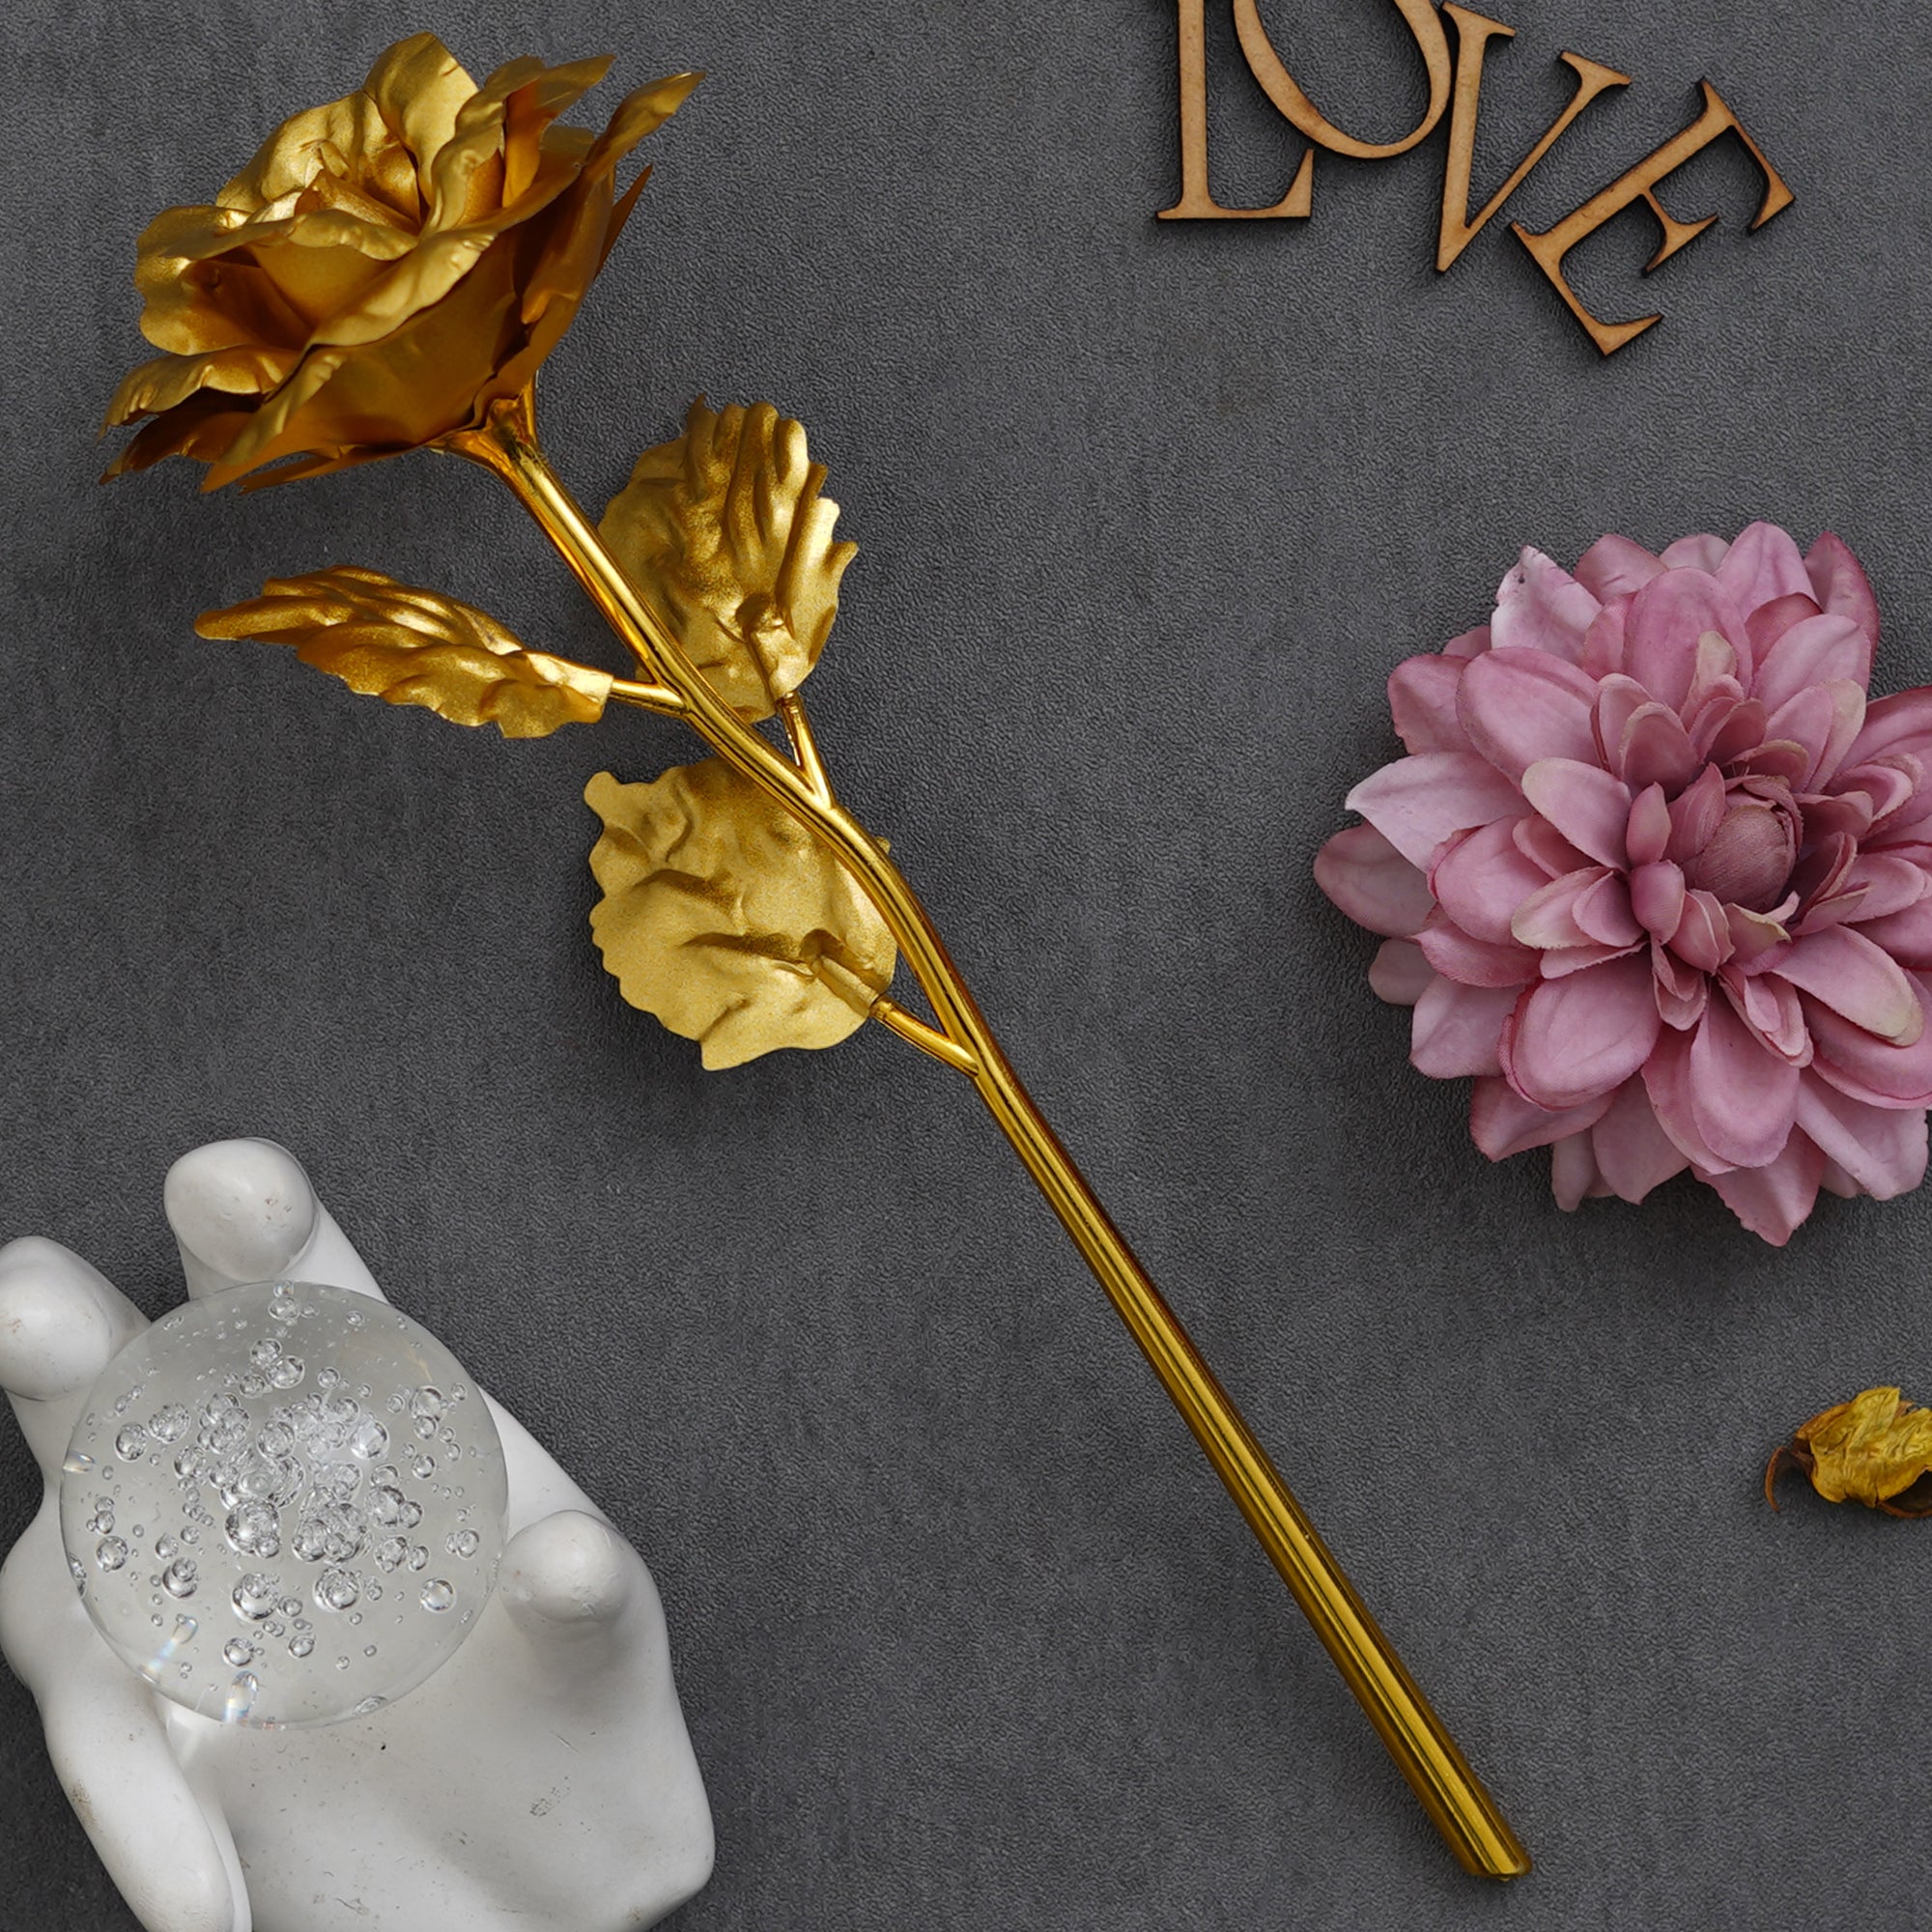 Valentine Combo of Golden Rose Gift Set, "Love You" Wooden Showpiece With Stand, Bride Kissing Groom Romantic Polyresin Decorative Showpiece 1